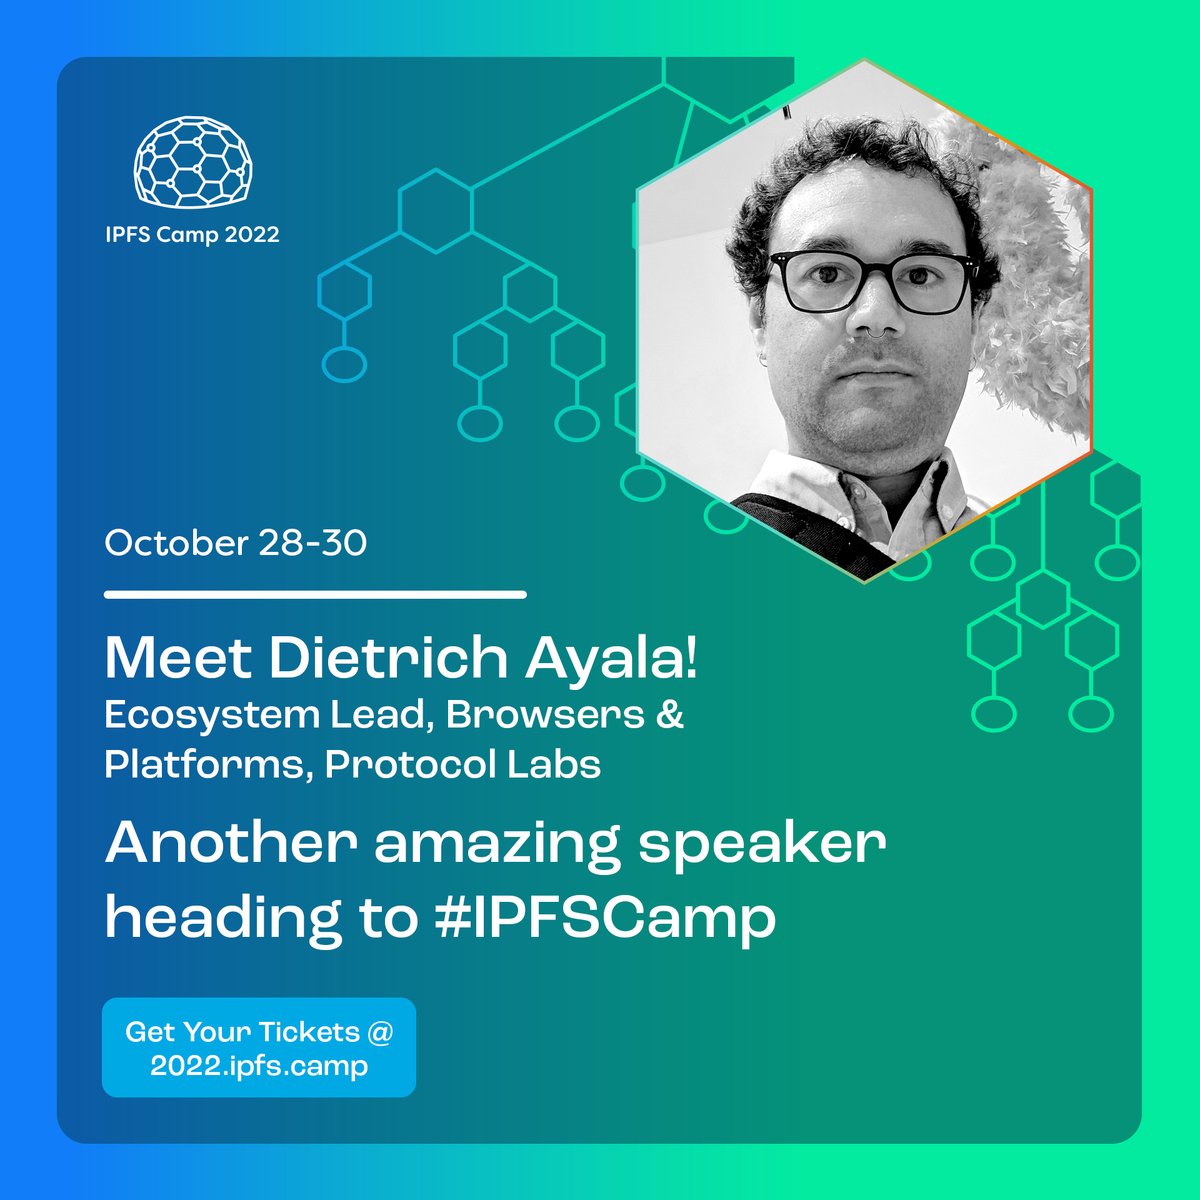 👋 Meet another amazing speaker heading to #IPFSCamp. 🗣️ Dietrich Ayala @dietrich • Ecosystem Lead, Browsers & Platforms, Protocol Labs ✏️ Register at 2022.ipfs.camp/#tickets